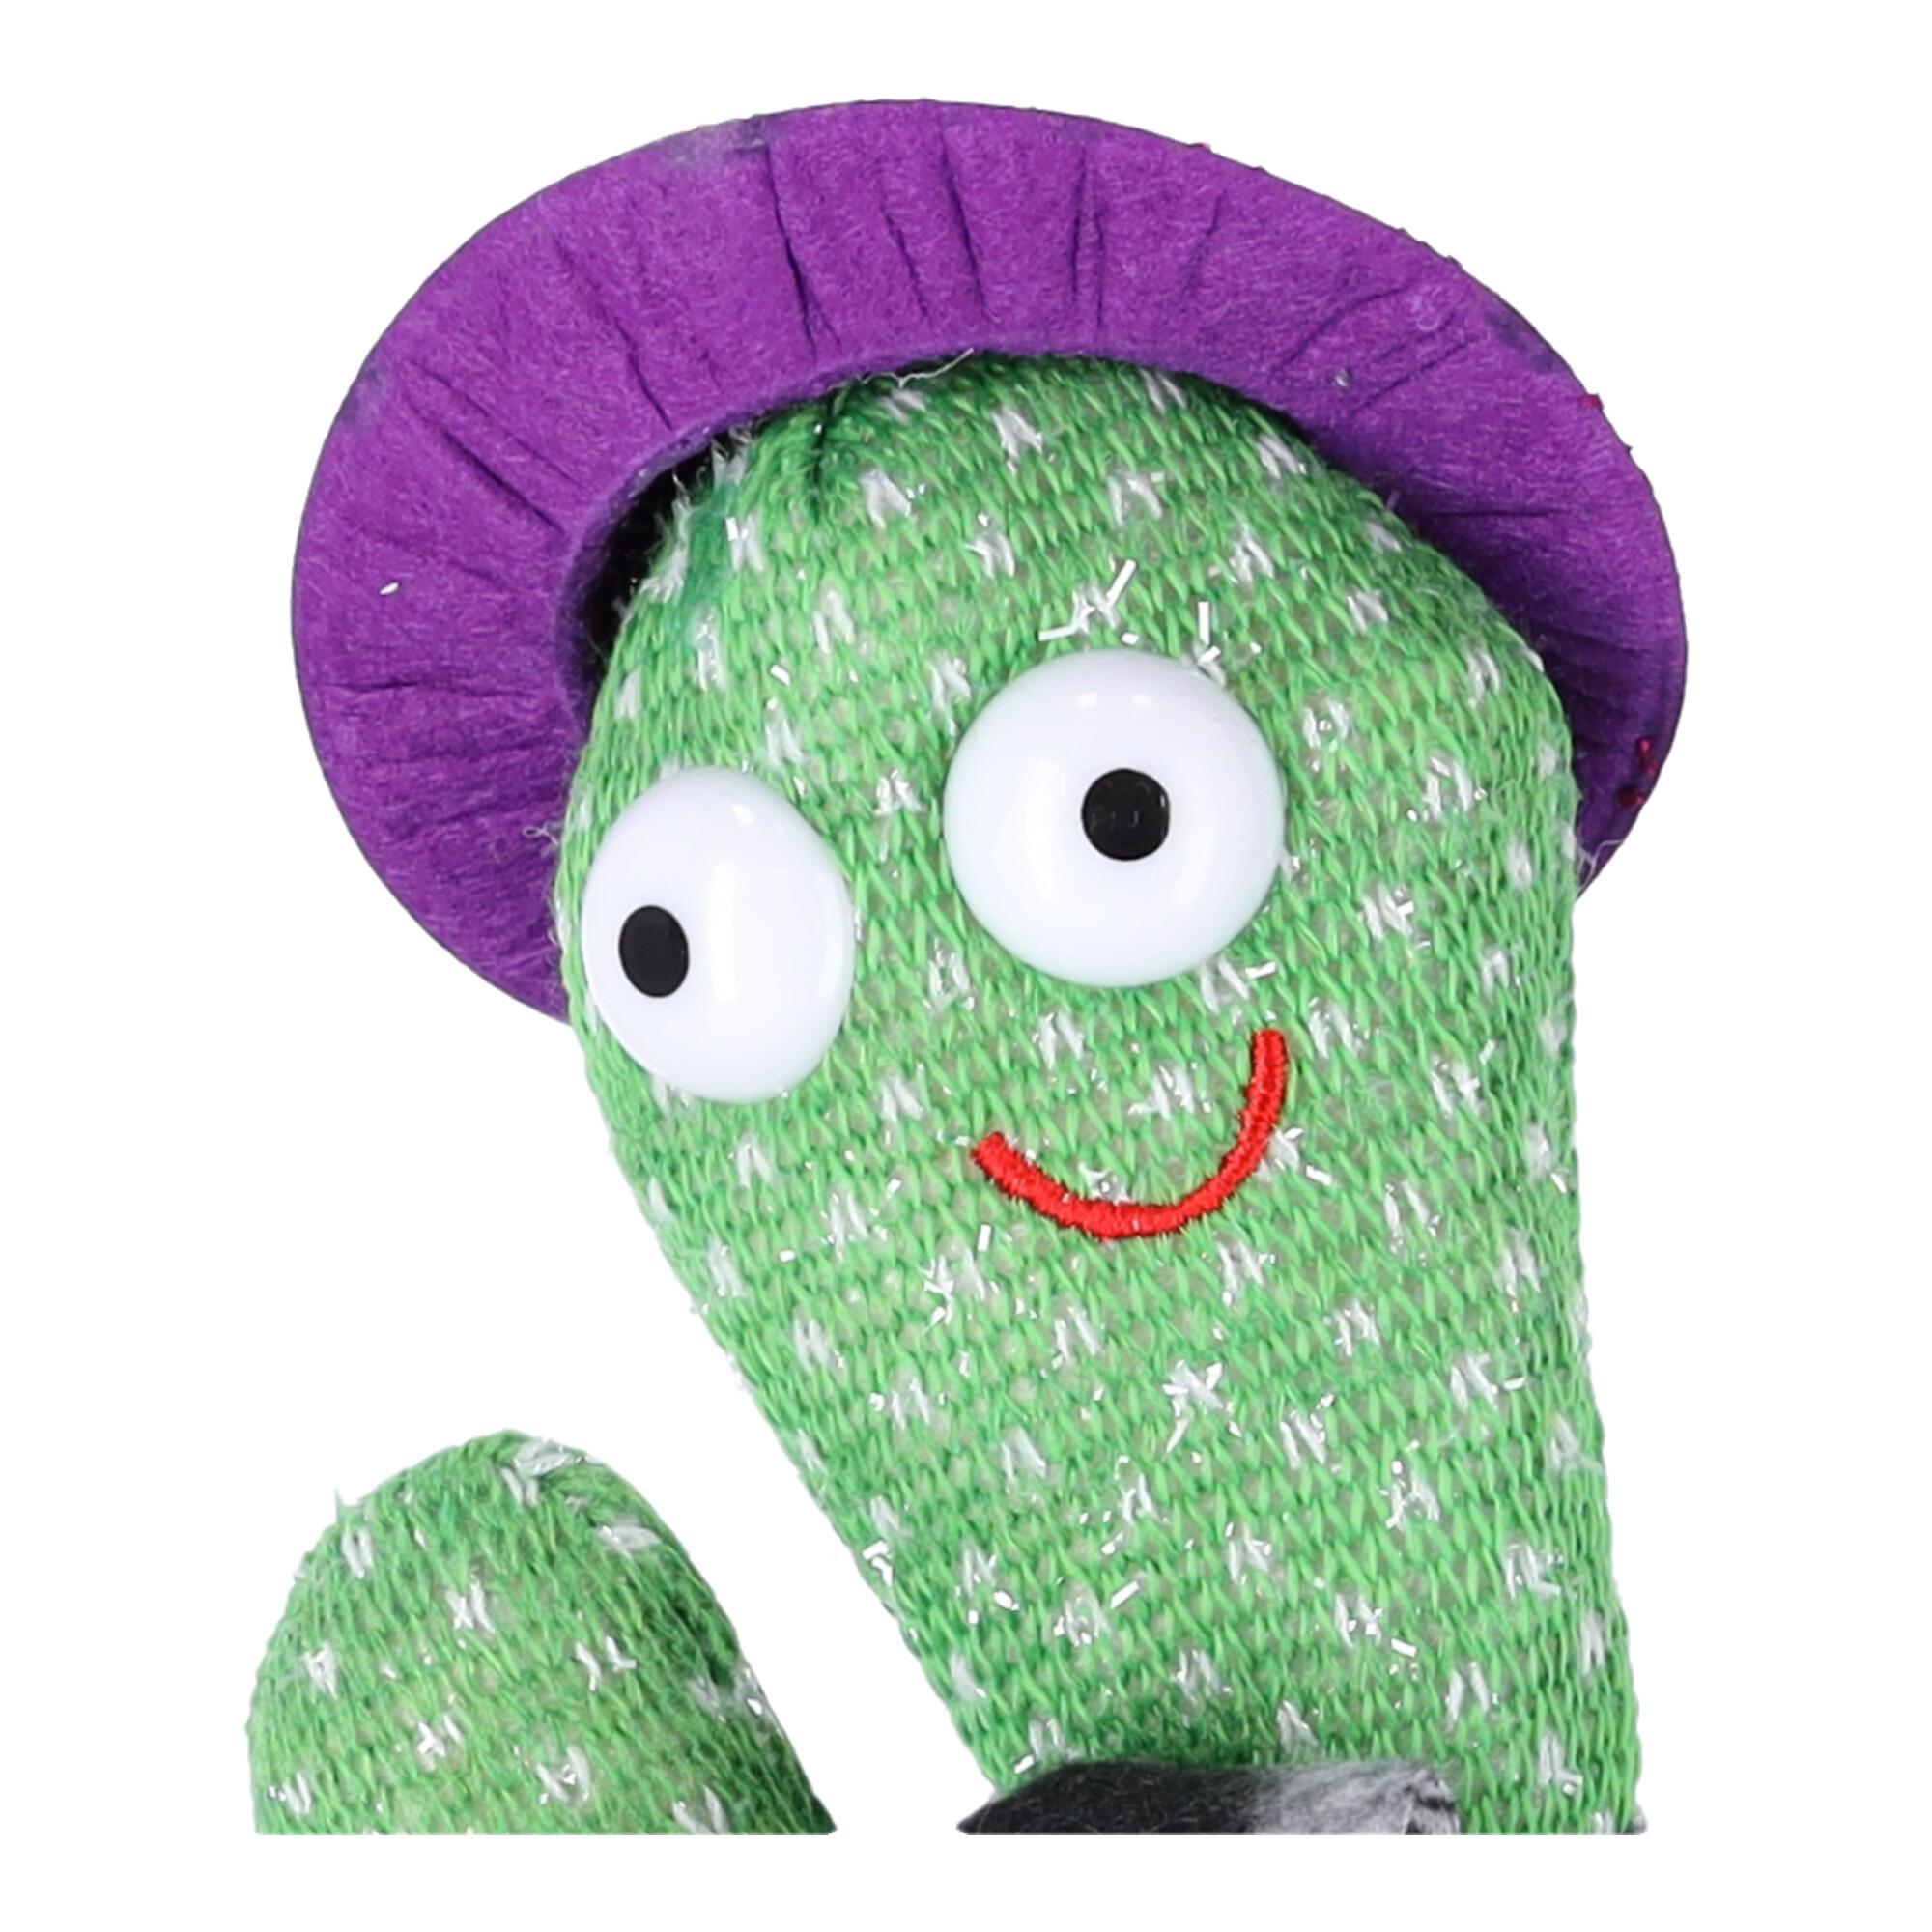 Children's toy - Dancing cactus - with black checkered scarf and purple hat